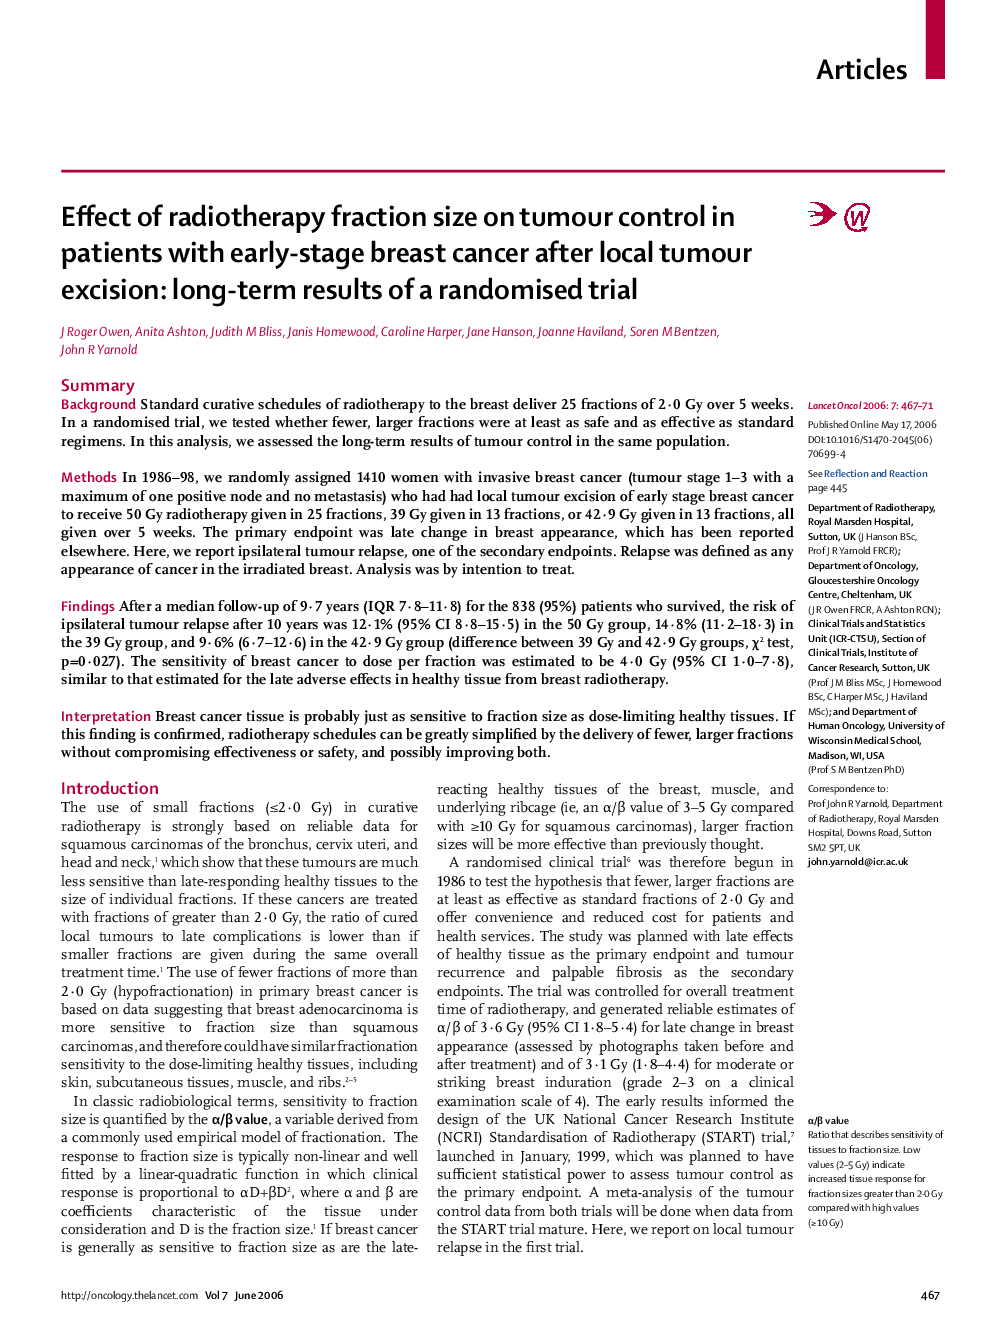 Effect of radiotherapy fraction size on tumour control in patients with early-stage breast cancer after local tumour excision: long-term results of a randomised trial